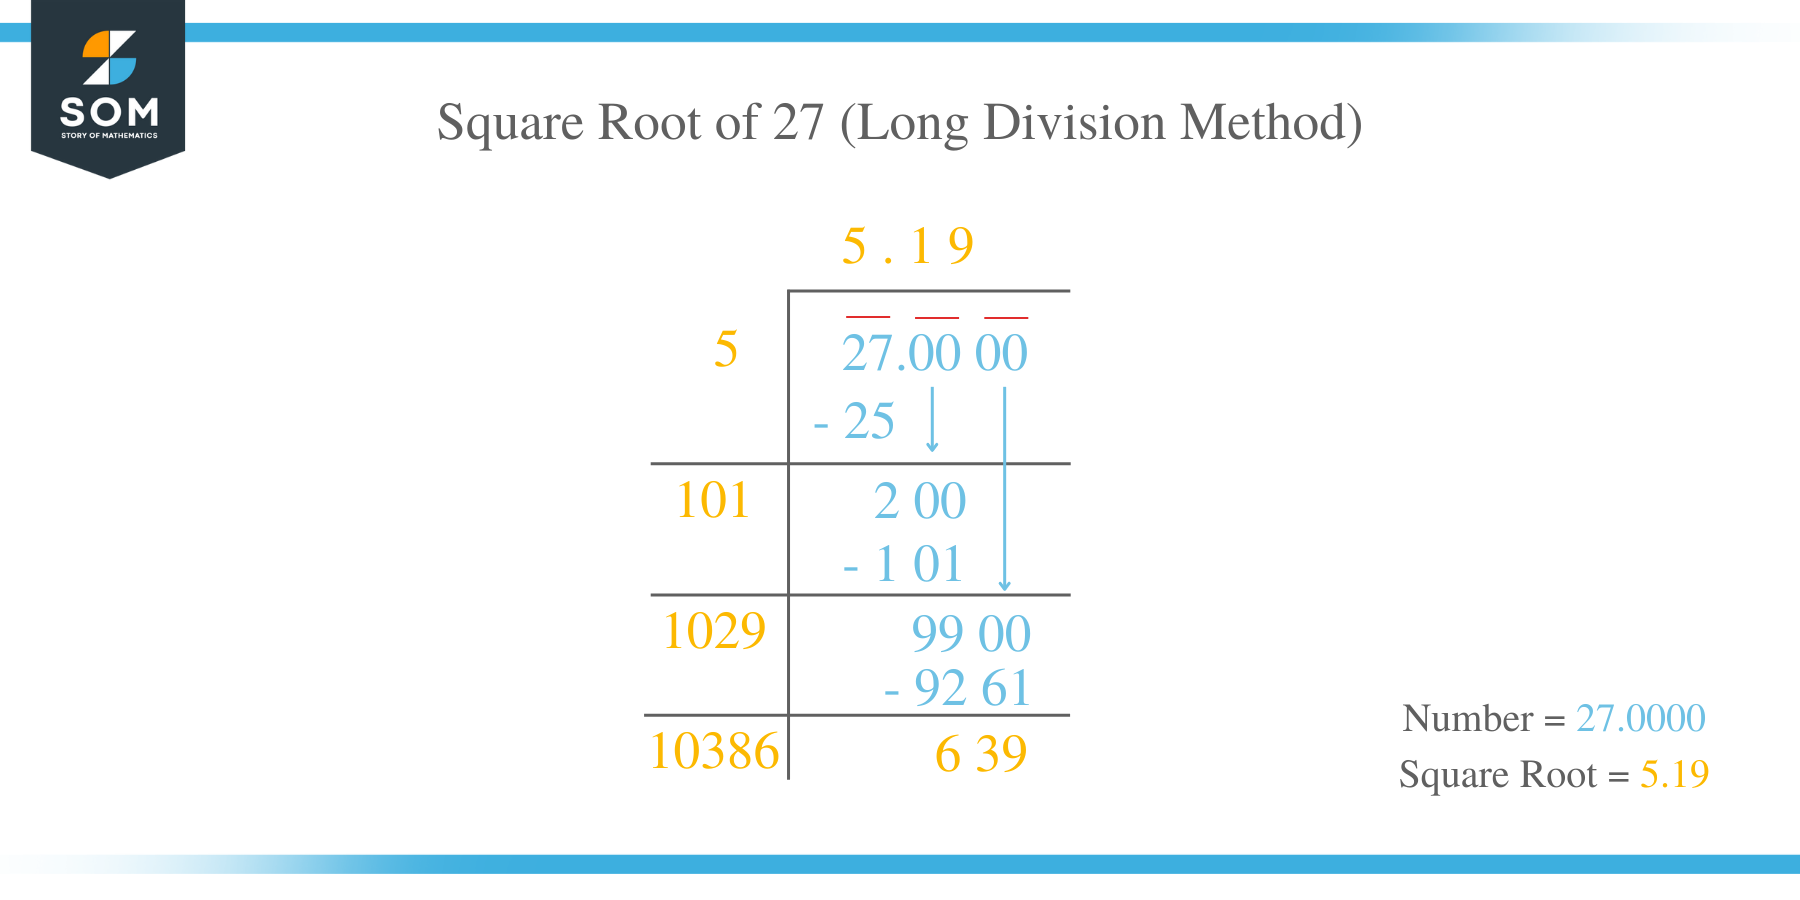 Square Root of 27 by Long Division Method